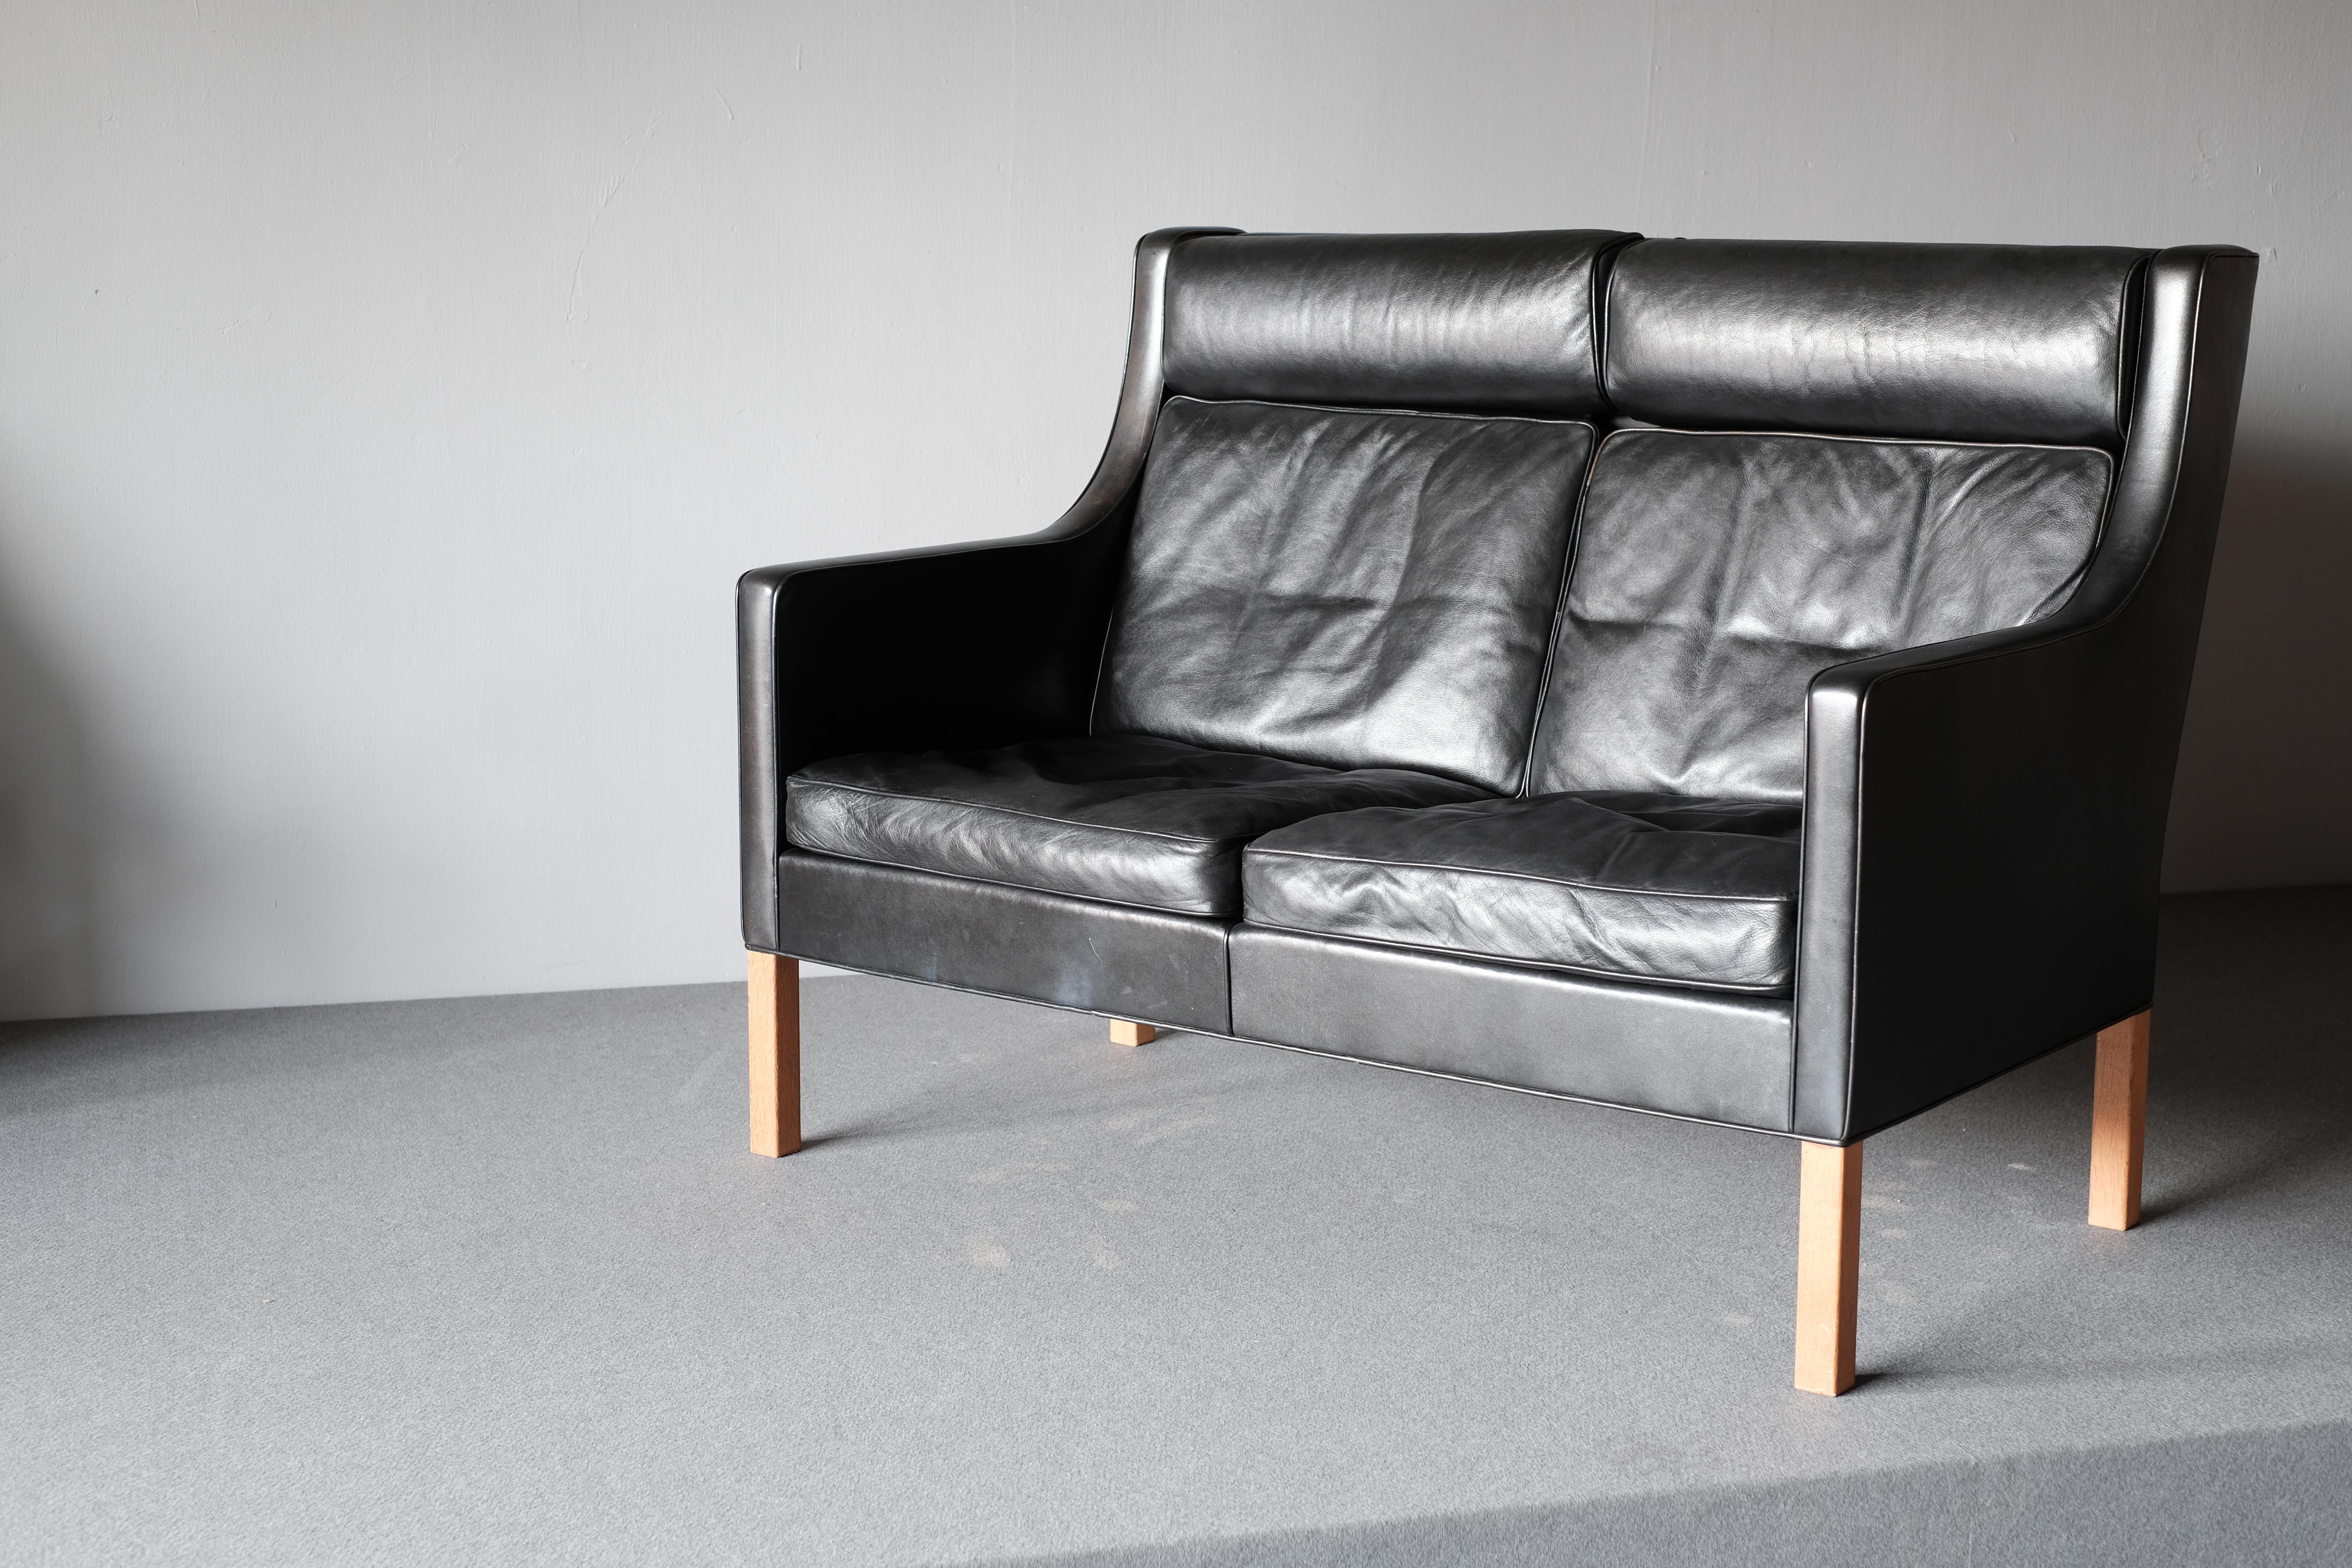 2-seat sofa by Borge Mogensen, manufactured by Fredericia. This model 2432 is upholstered in wonderfully patinated black leather and has legs in oak. 

The wonderful quality of the sofa made from solid oak, upholstered in high grade leather and